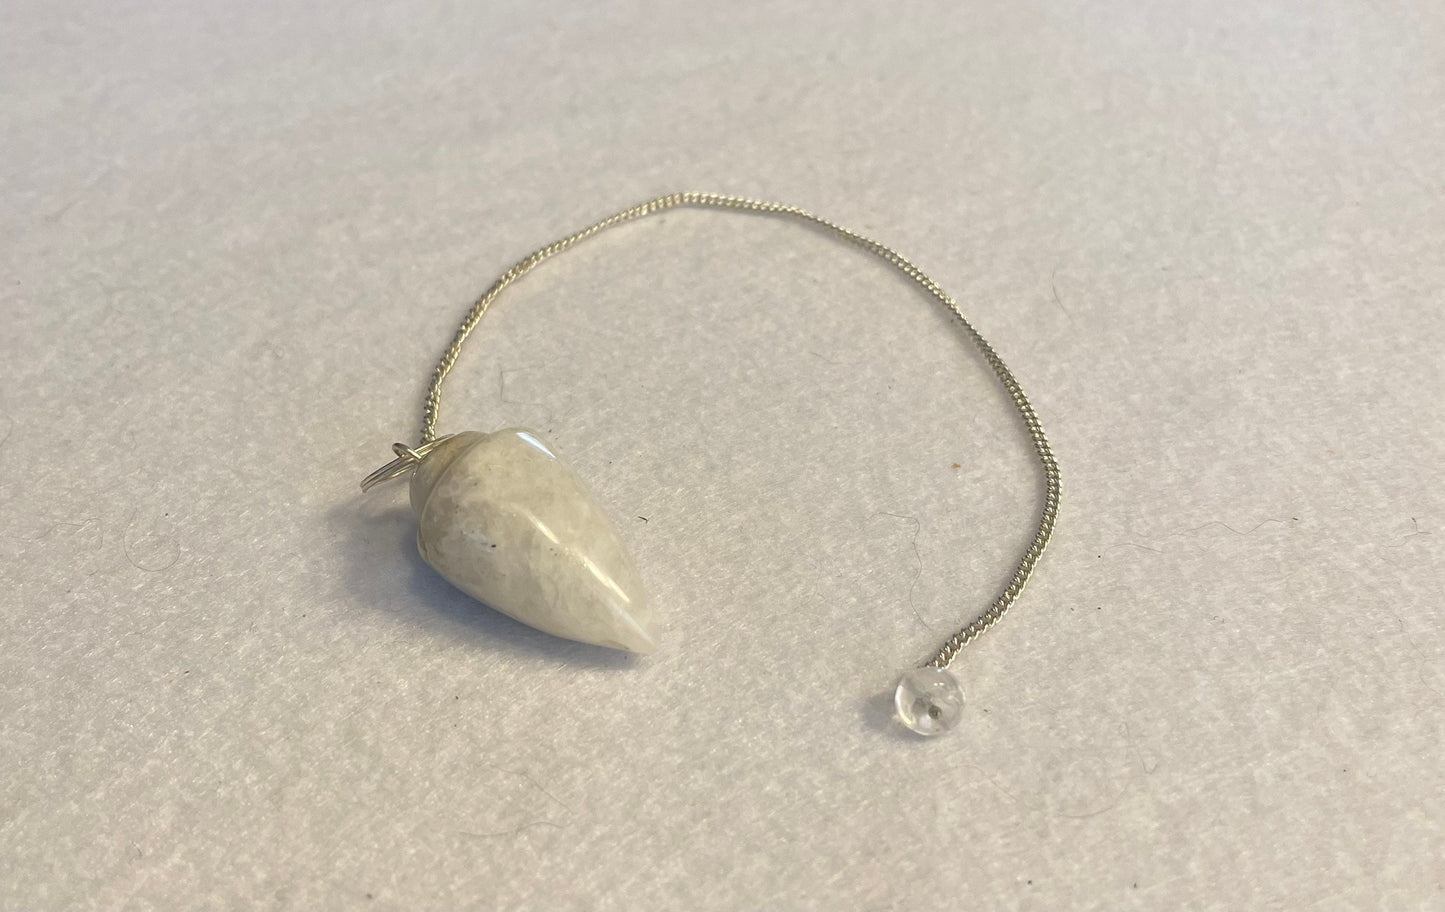 beautiful white Quartz pendulum is approximately 1 1/8” and with chain is 8.5” total length